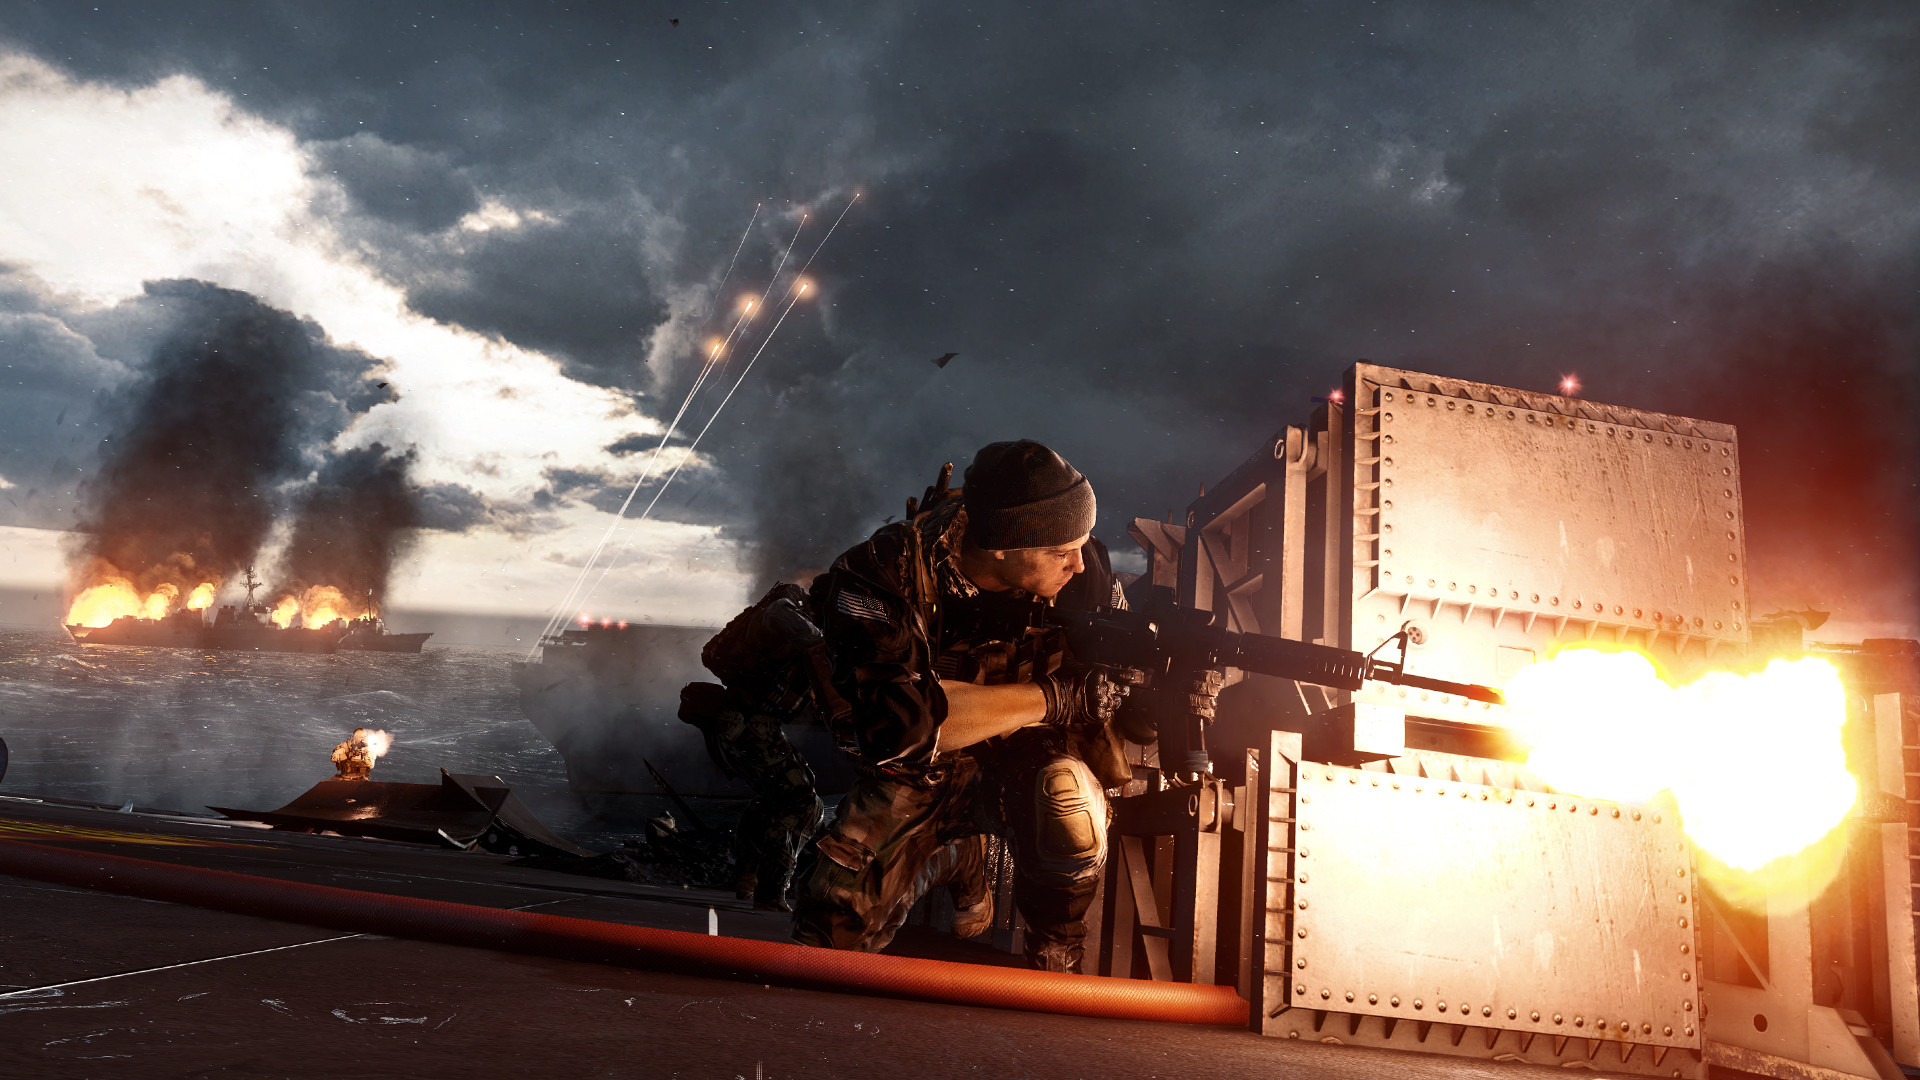 Battlefield 4 System Requirements, Release Date and Beta Access